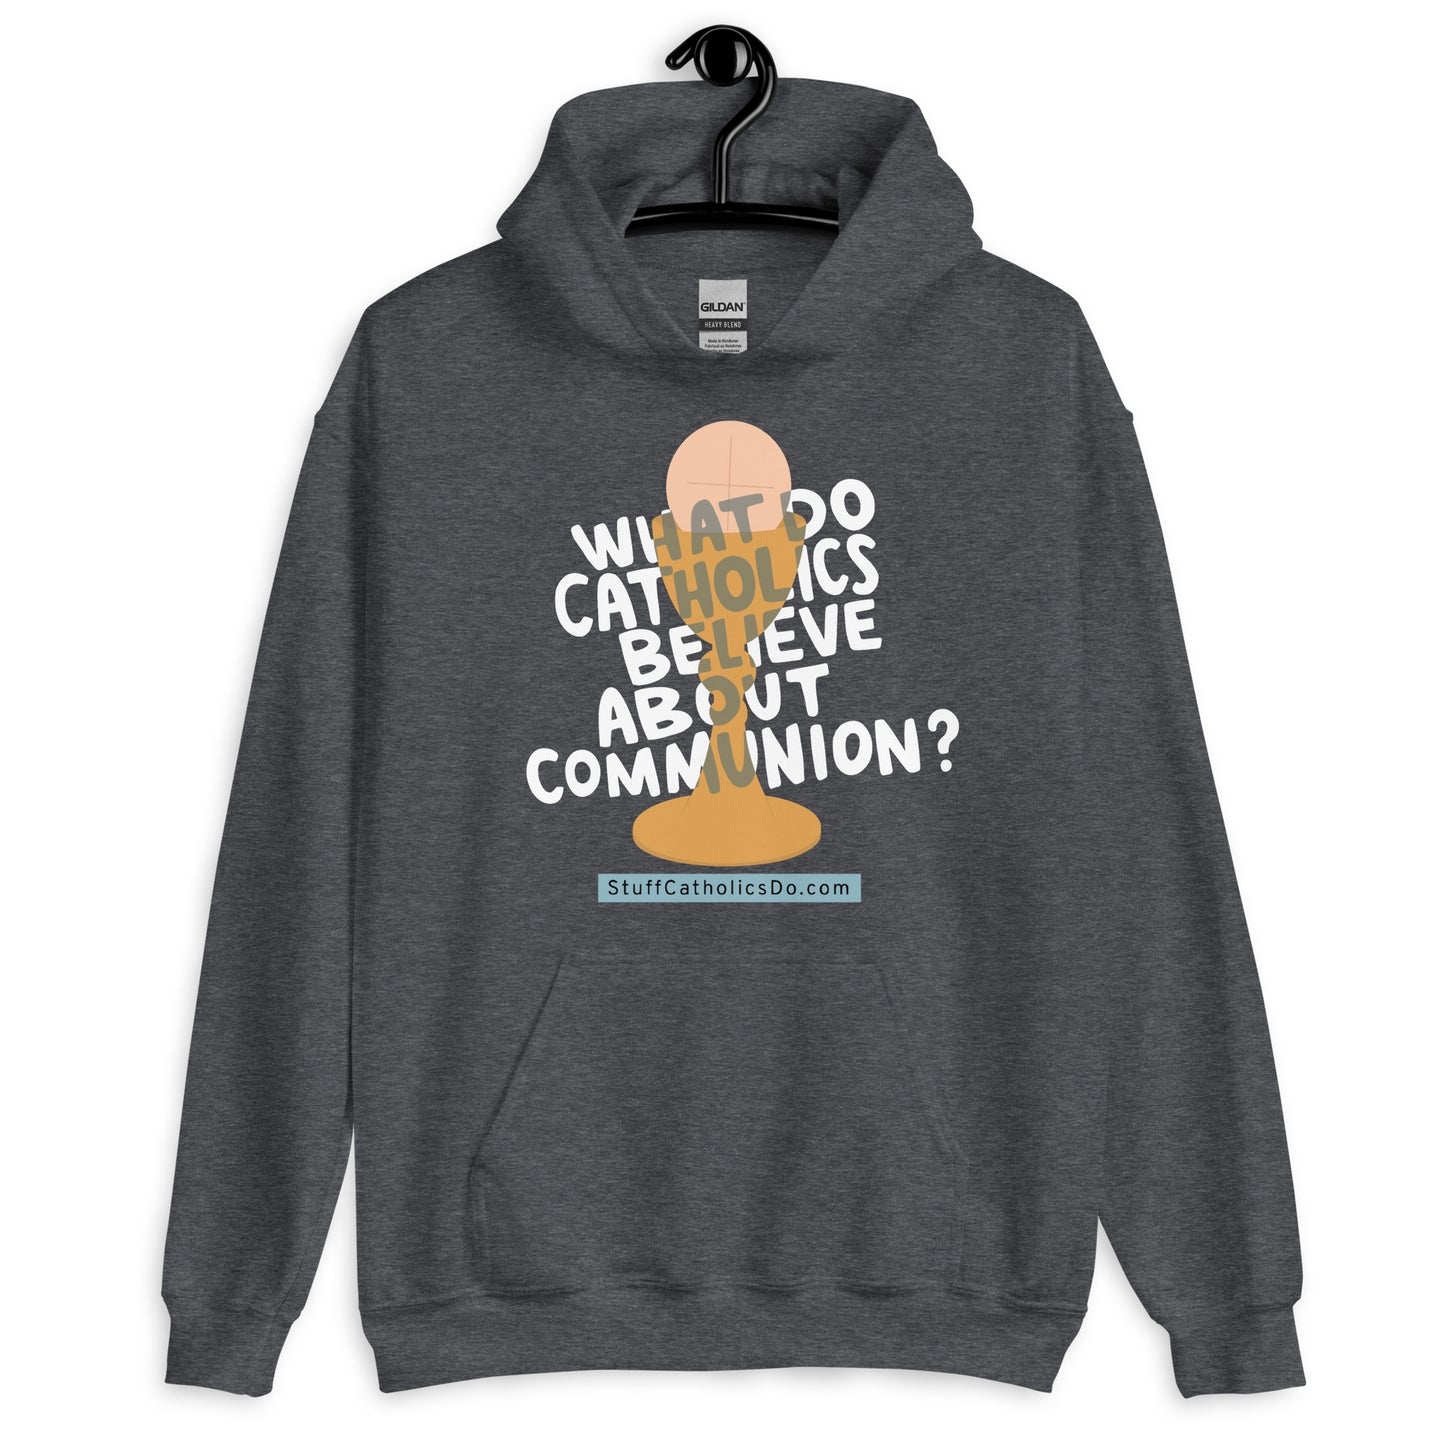 "What Do Catholics Believe About Communion?" Hoodie - Front Only